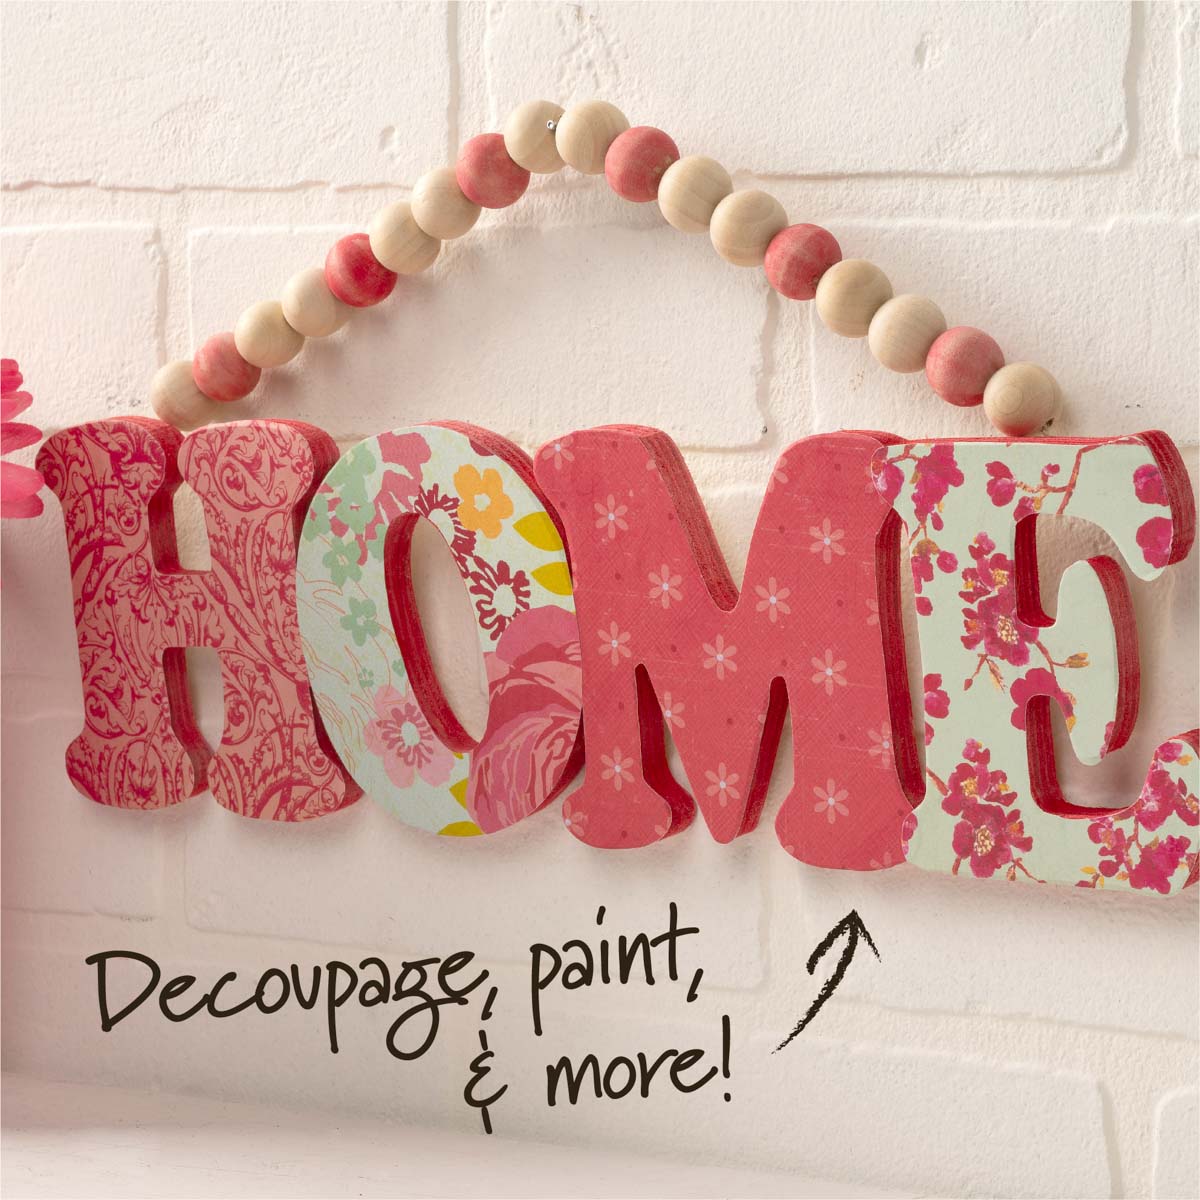 Plaid ® Wood Surfaces - Home Sign with Beaded Handle - 56992